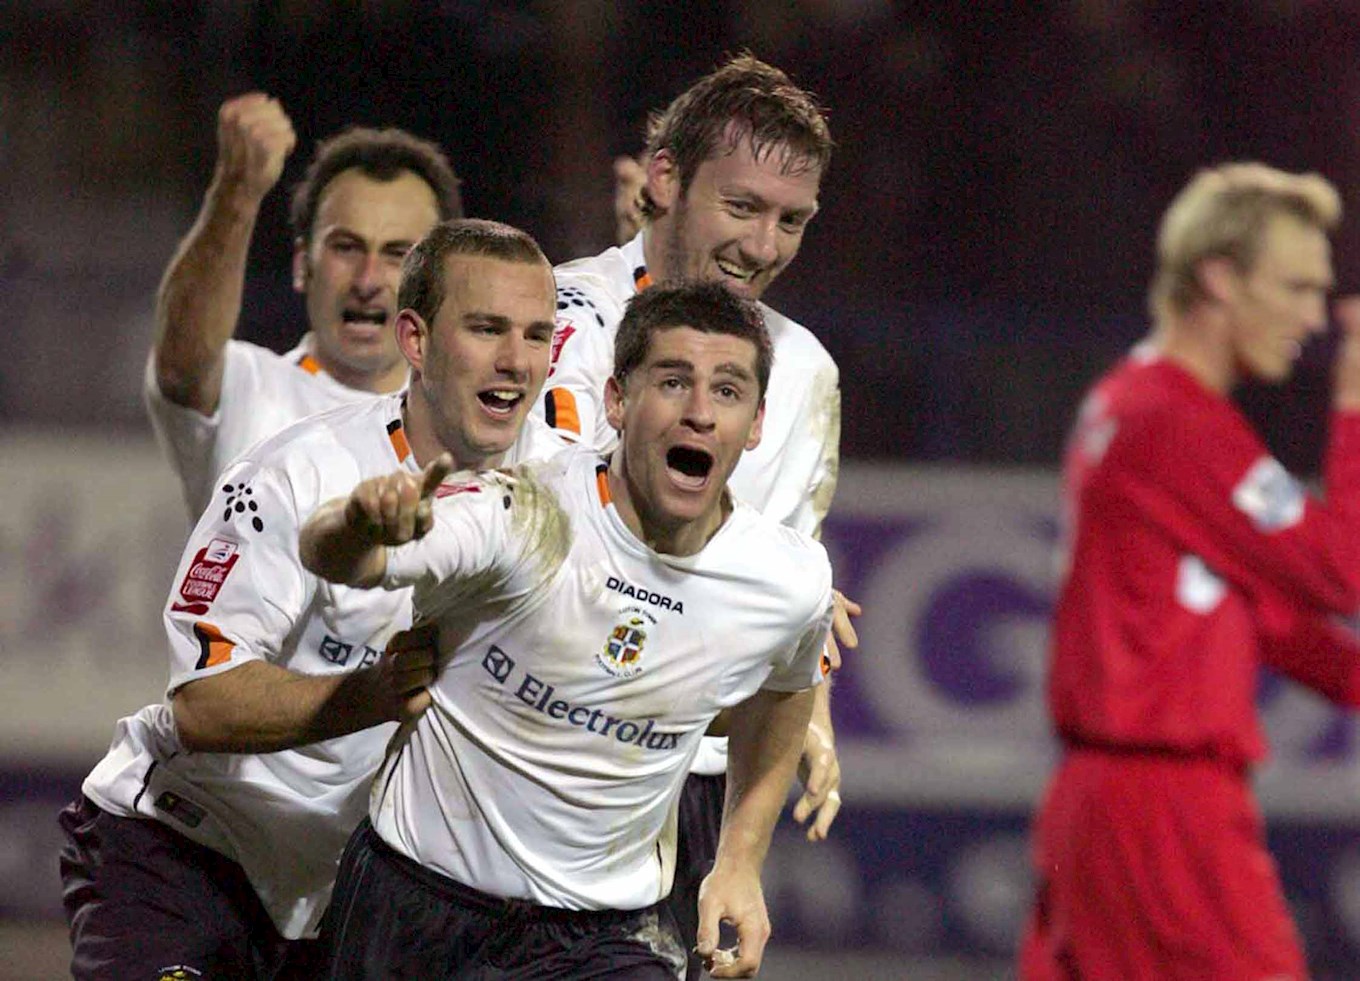 Steve Robinson celebrates his goal against Liverpool at Kenilworth Road in the FA Cup third round in January 2006.